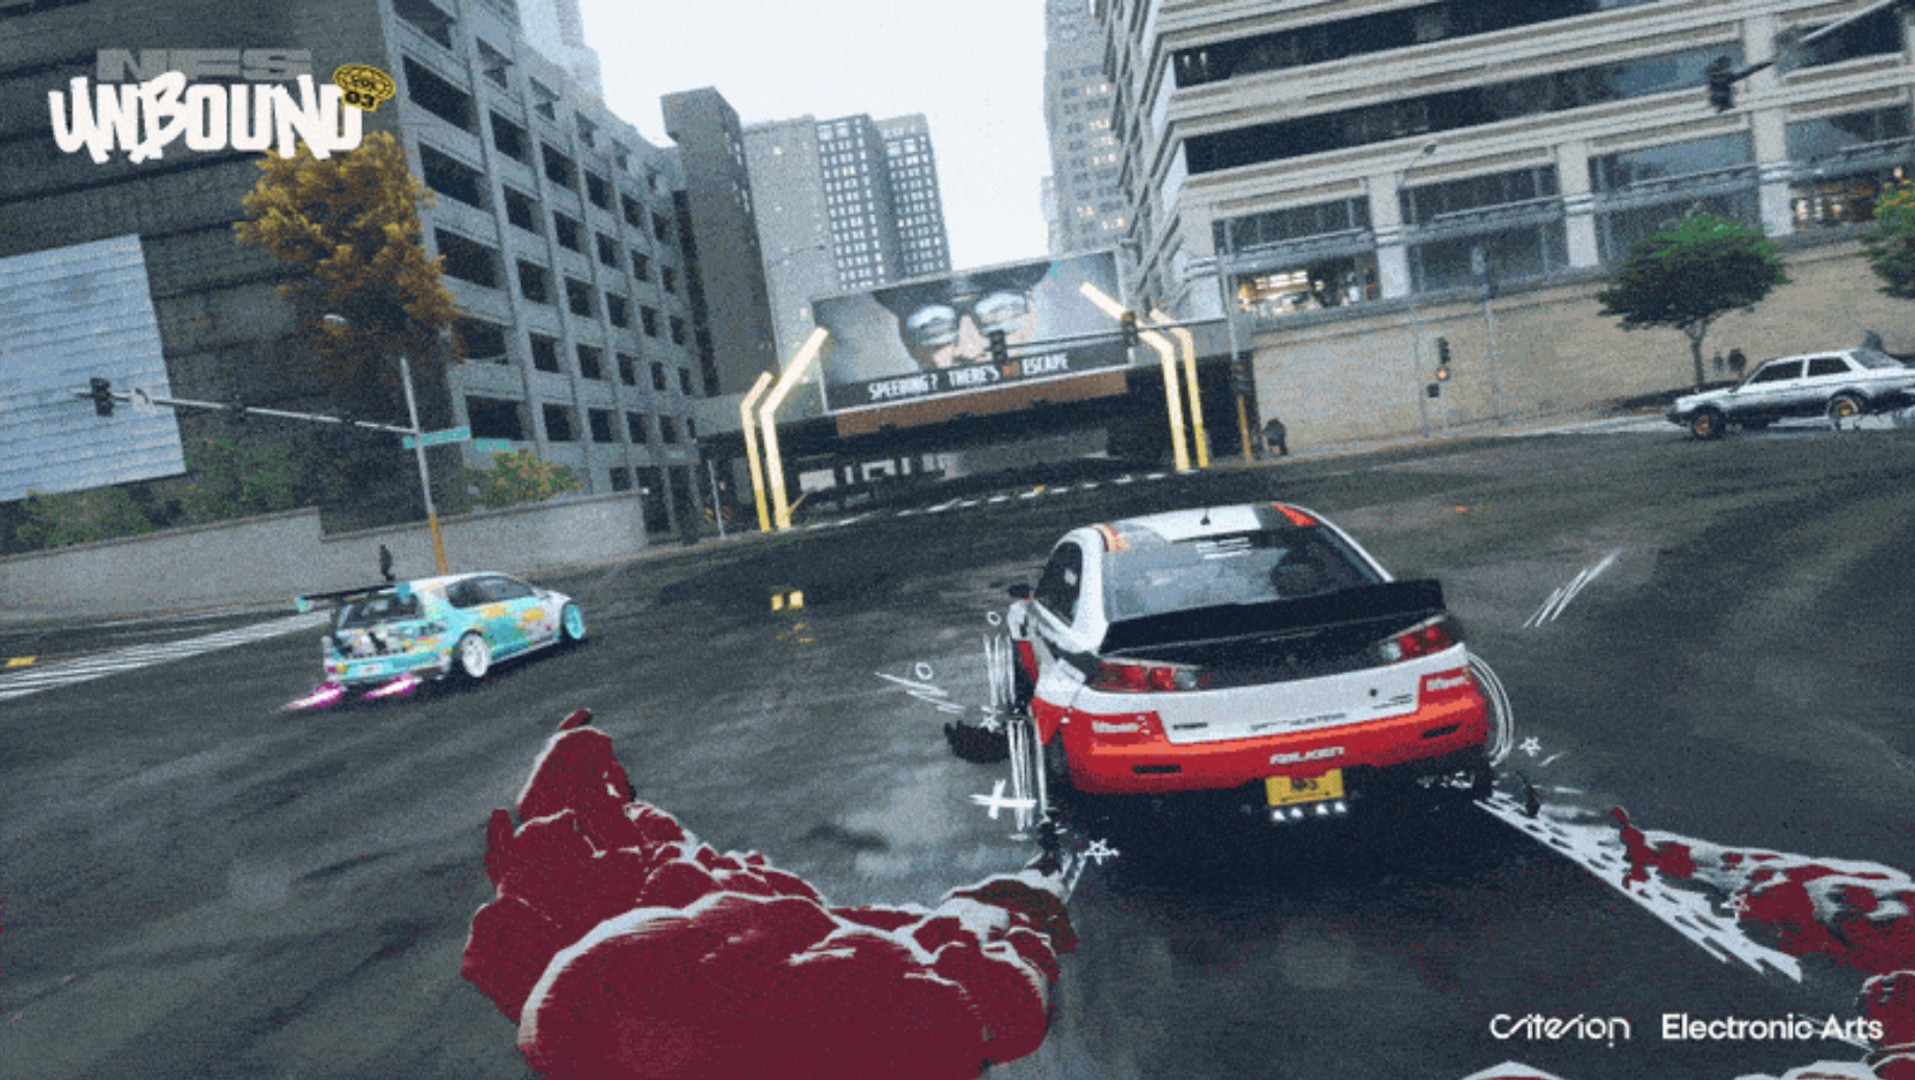 Need for Speed Unbound tech review - profound improvements, bold